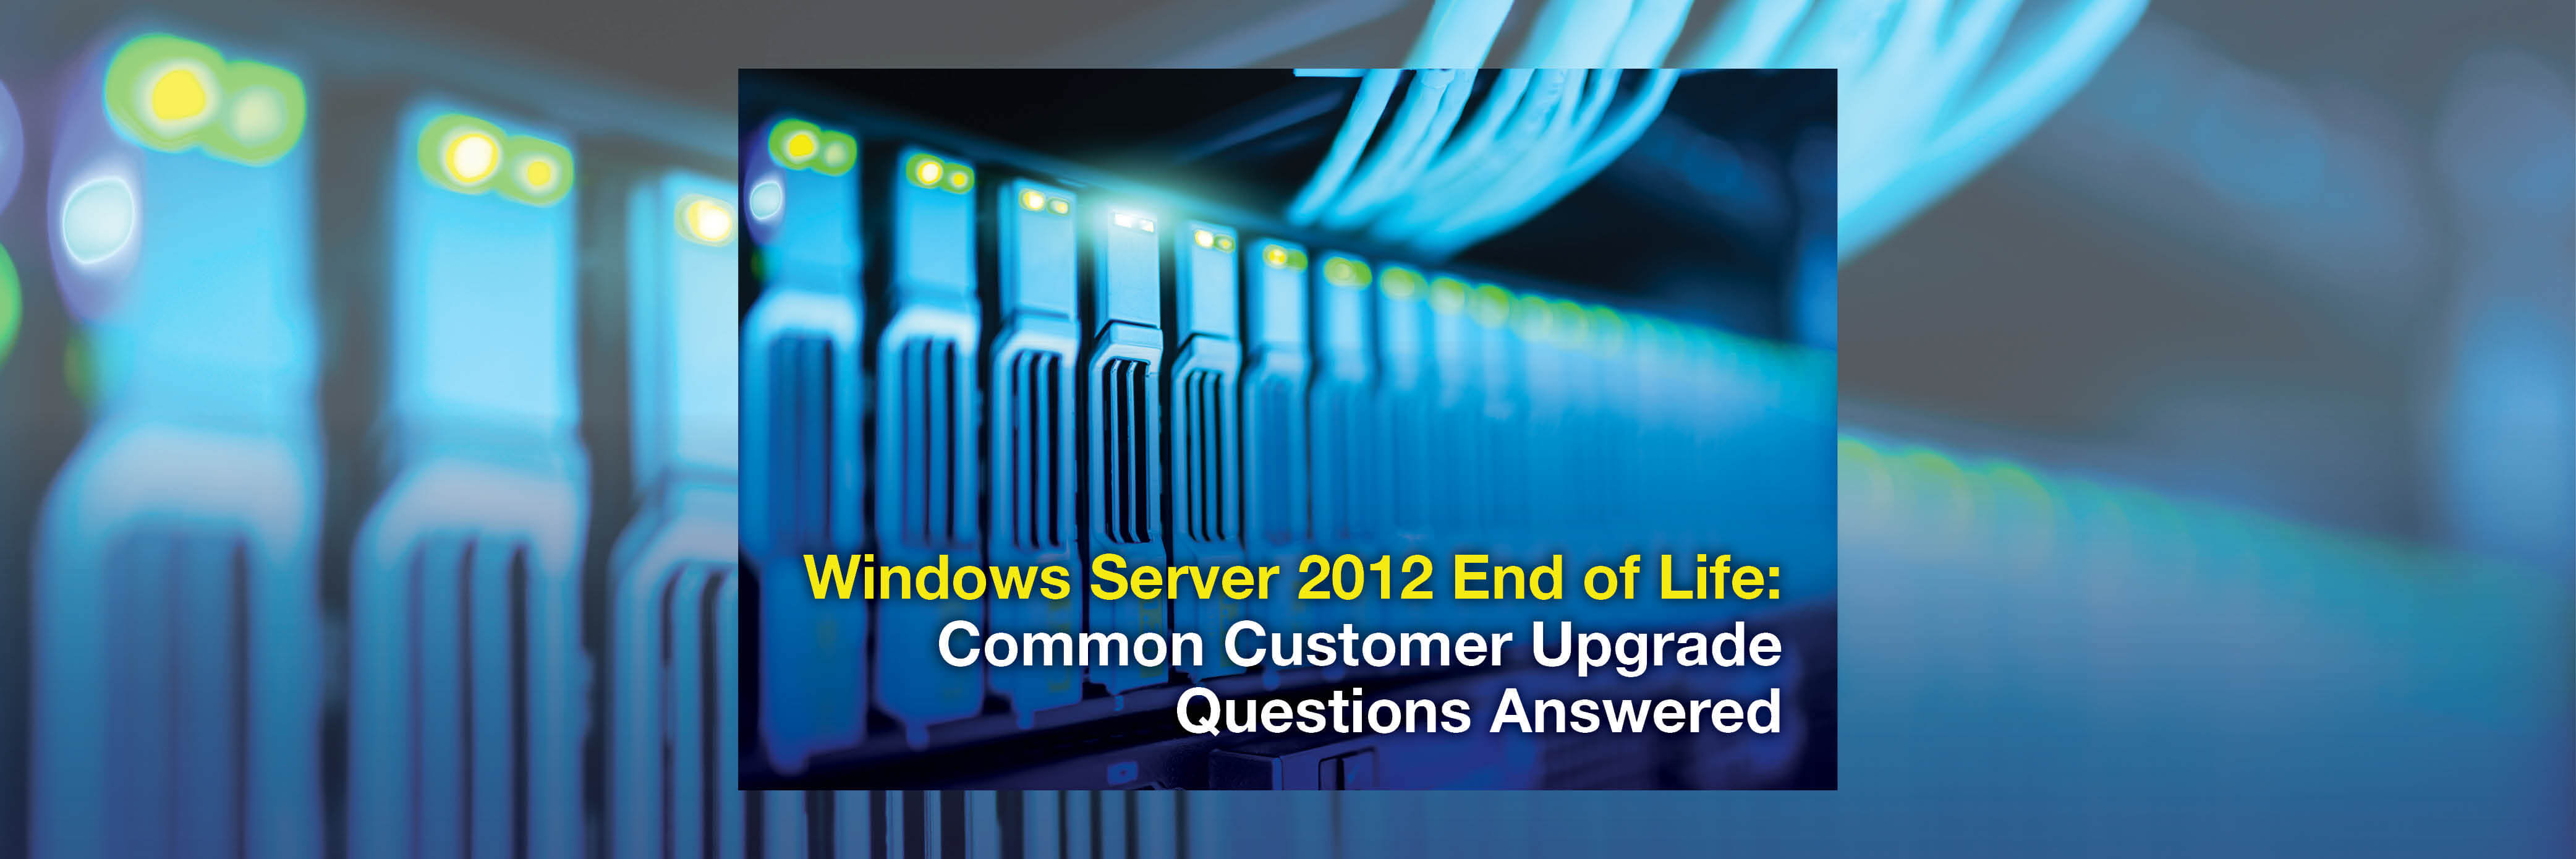 Windows Server 2012 End of Life: Common Customer Upgrade Questions Answered